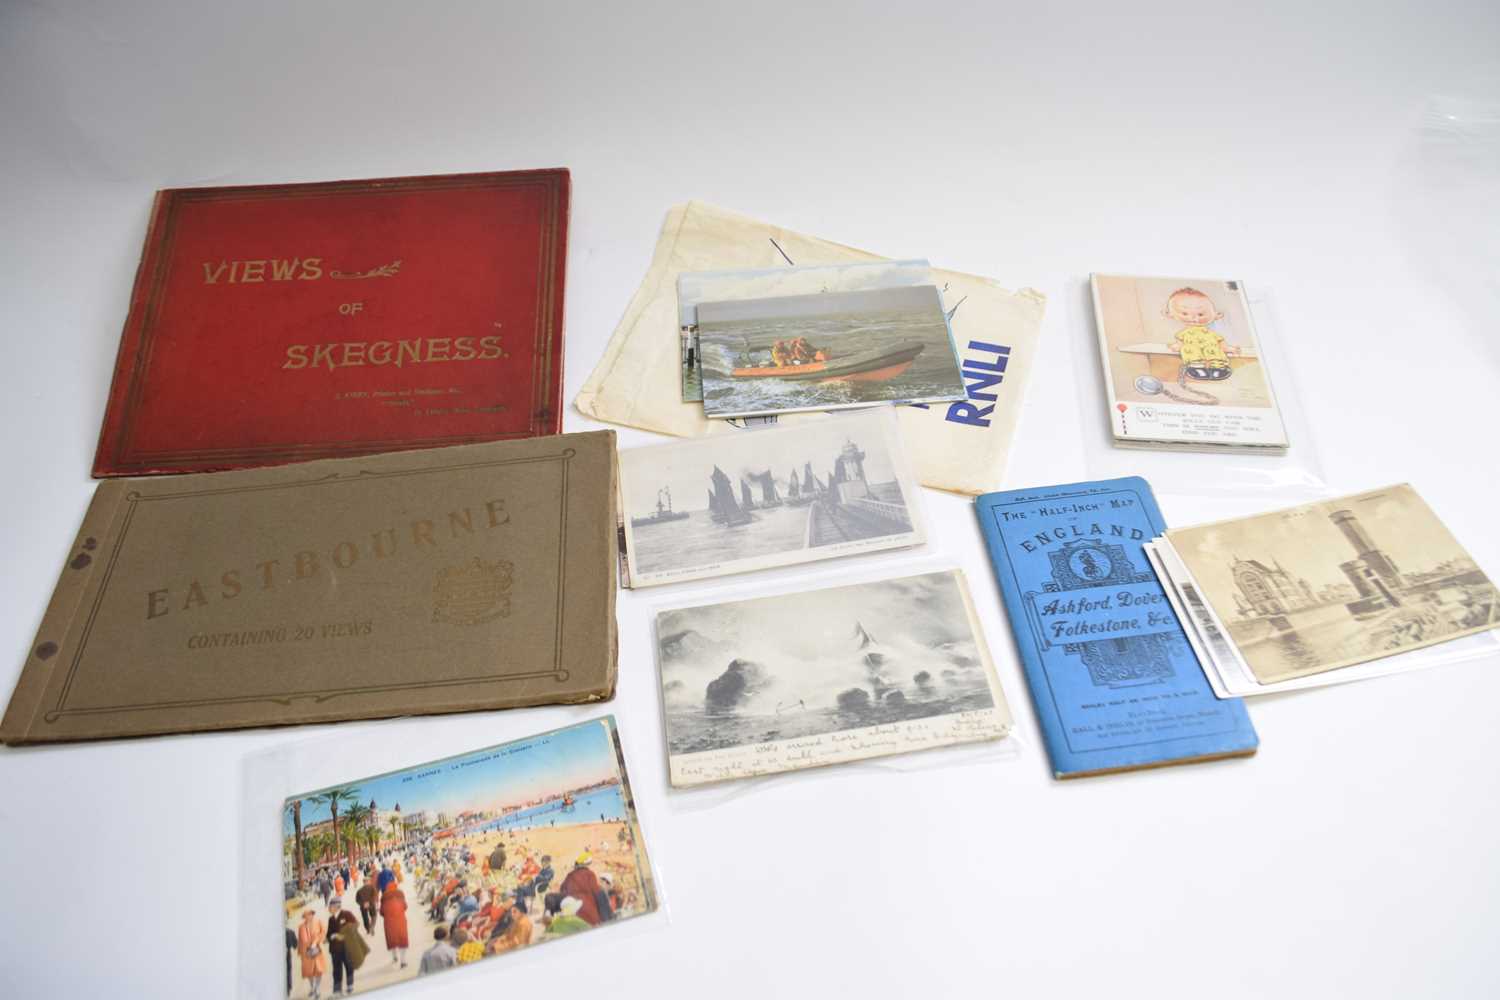 Tourist guide with views of Skegness, also Eastbourne and a number of postcards and small map for